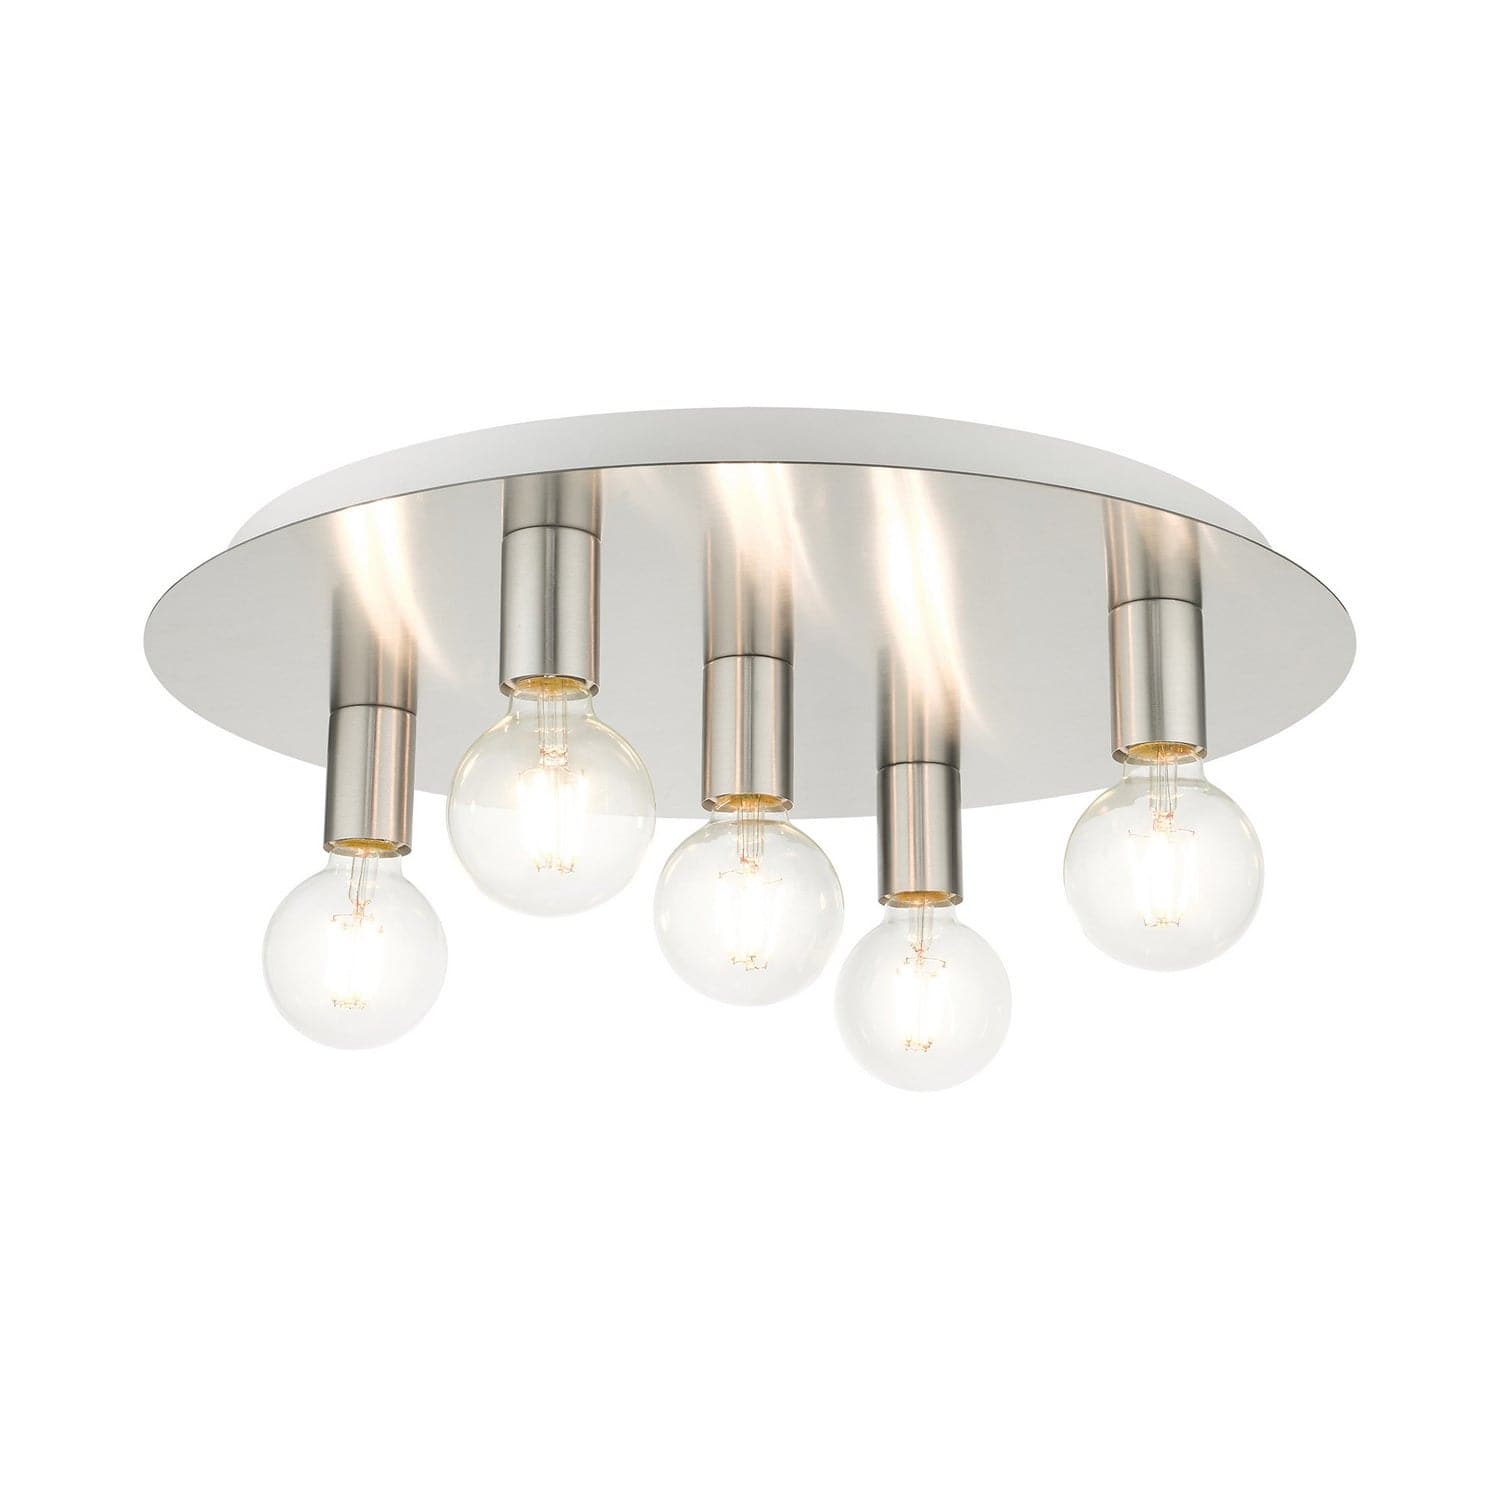 Livex Lighting - 45875-91 - Five Light Flush Mount - Hillview - Brushed Nickel w/ White Canopy